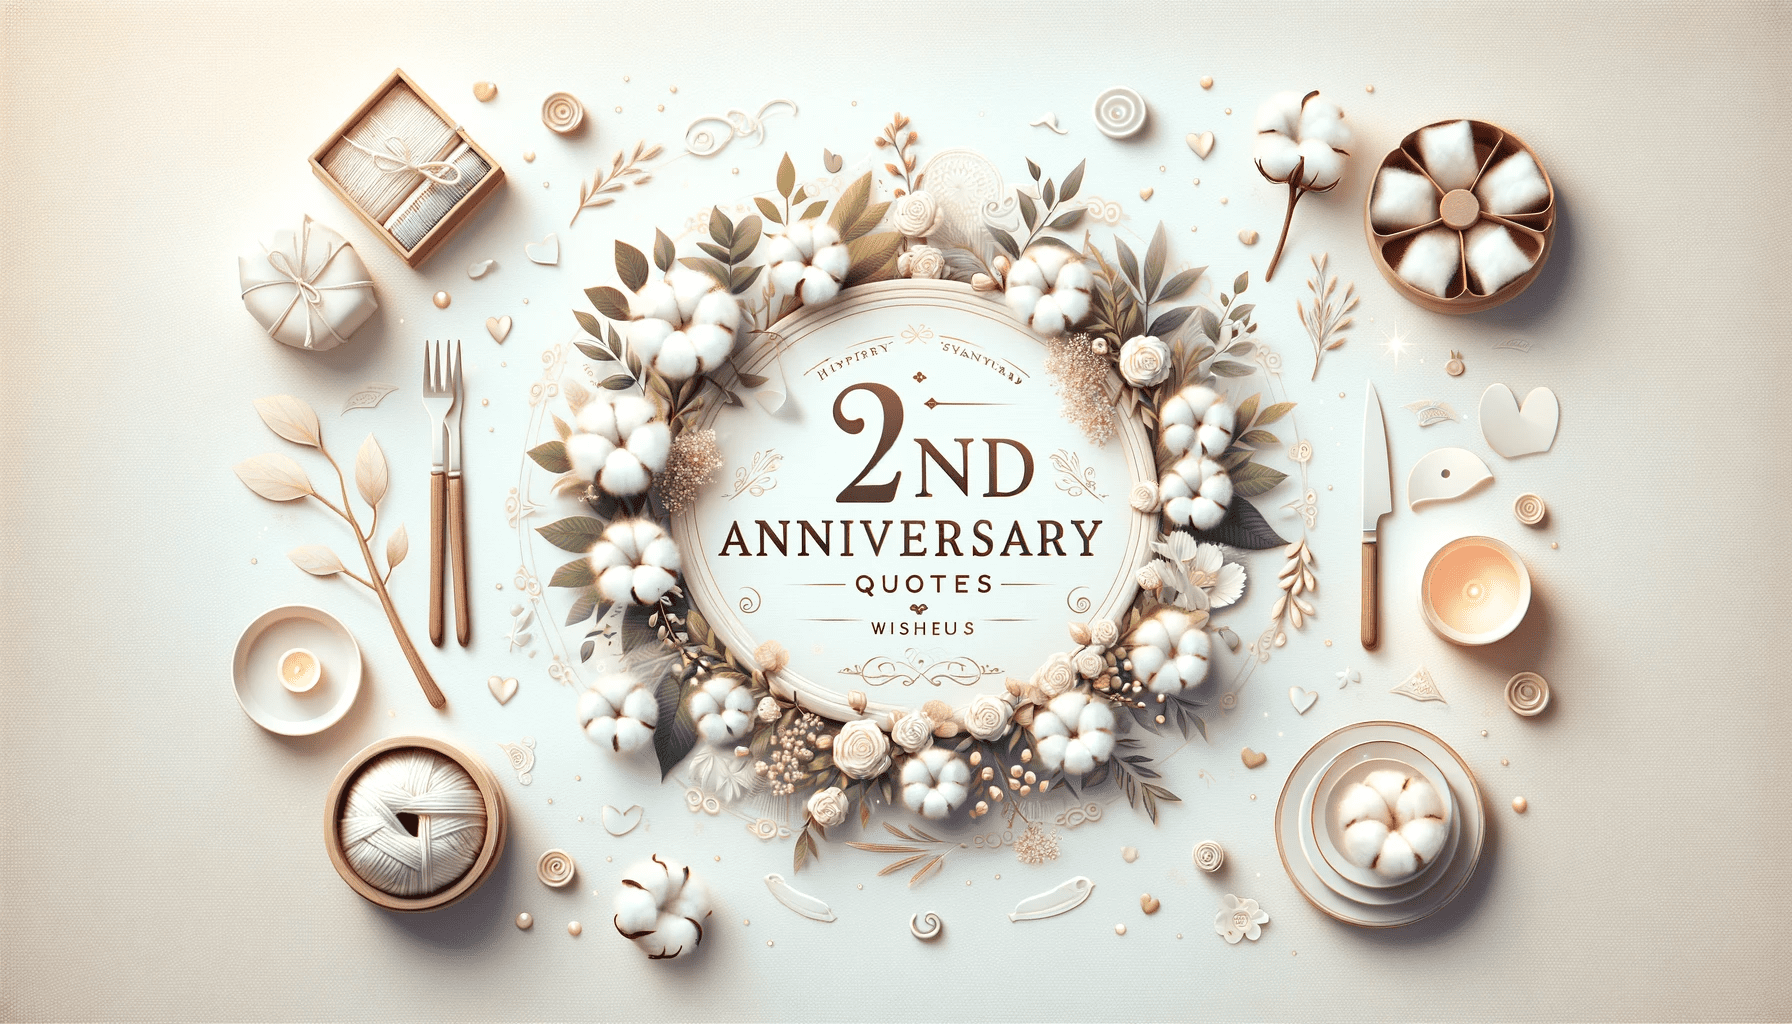 A visually appealing image for a social media post about 2nd wedding anniversary quotes, wishes, and captions. The image should feature elements symbol.